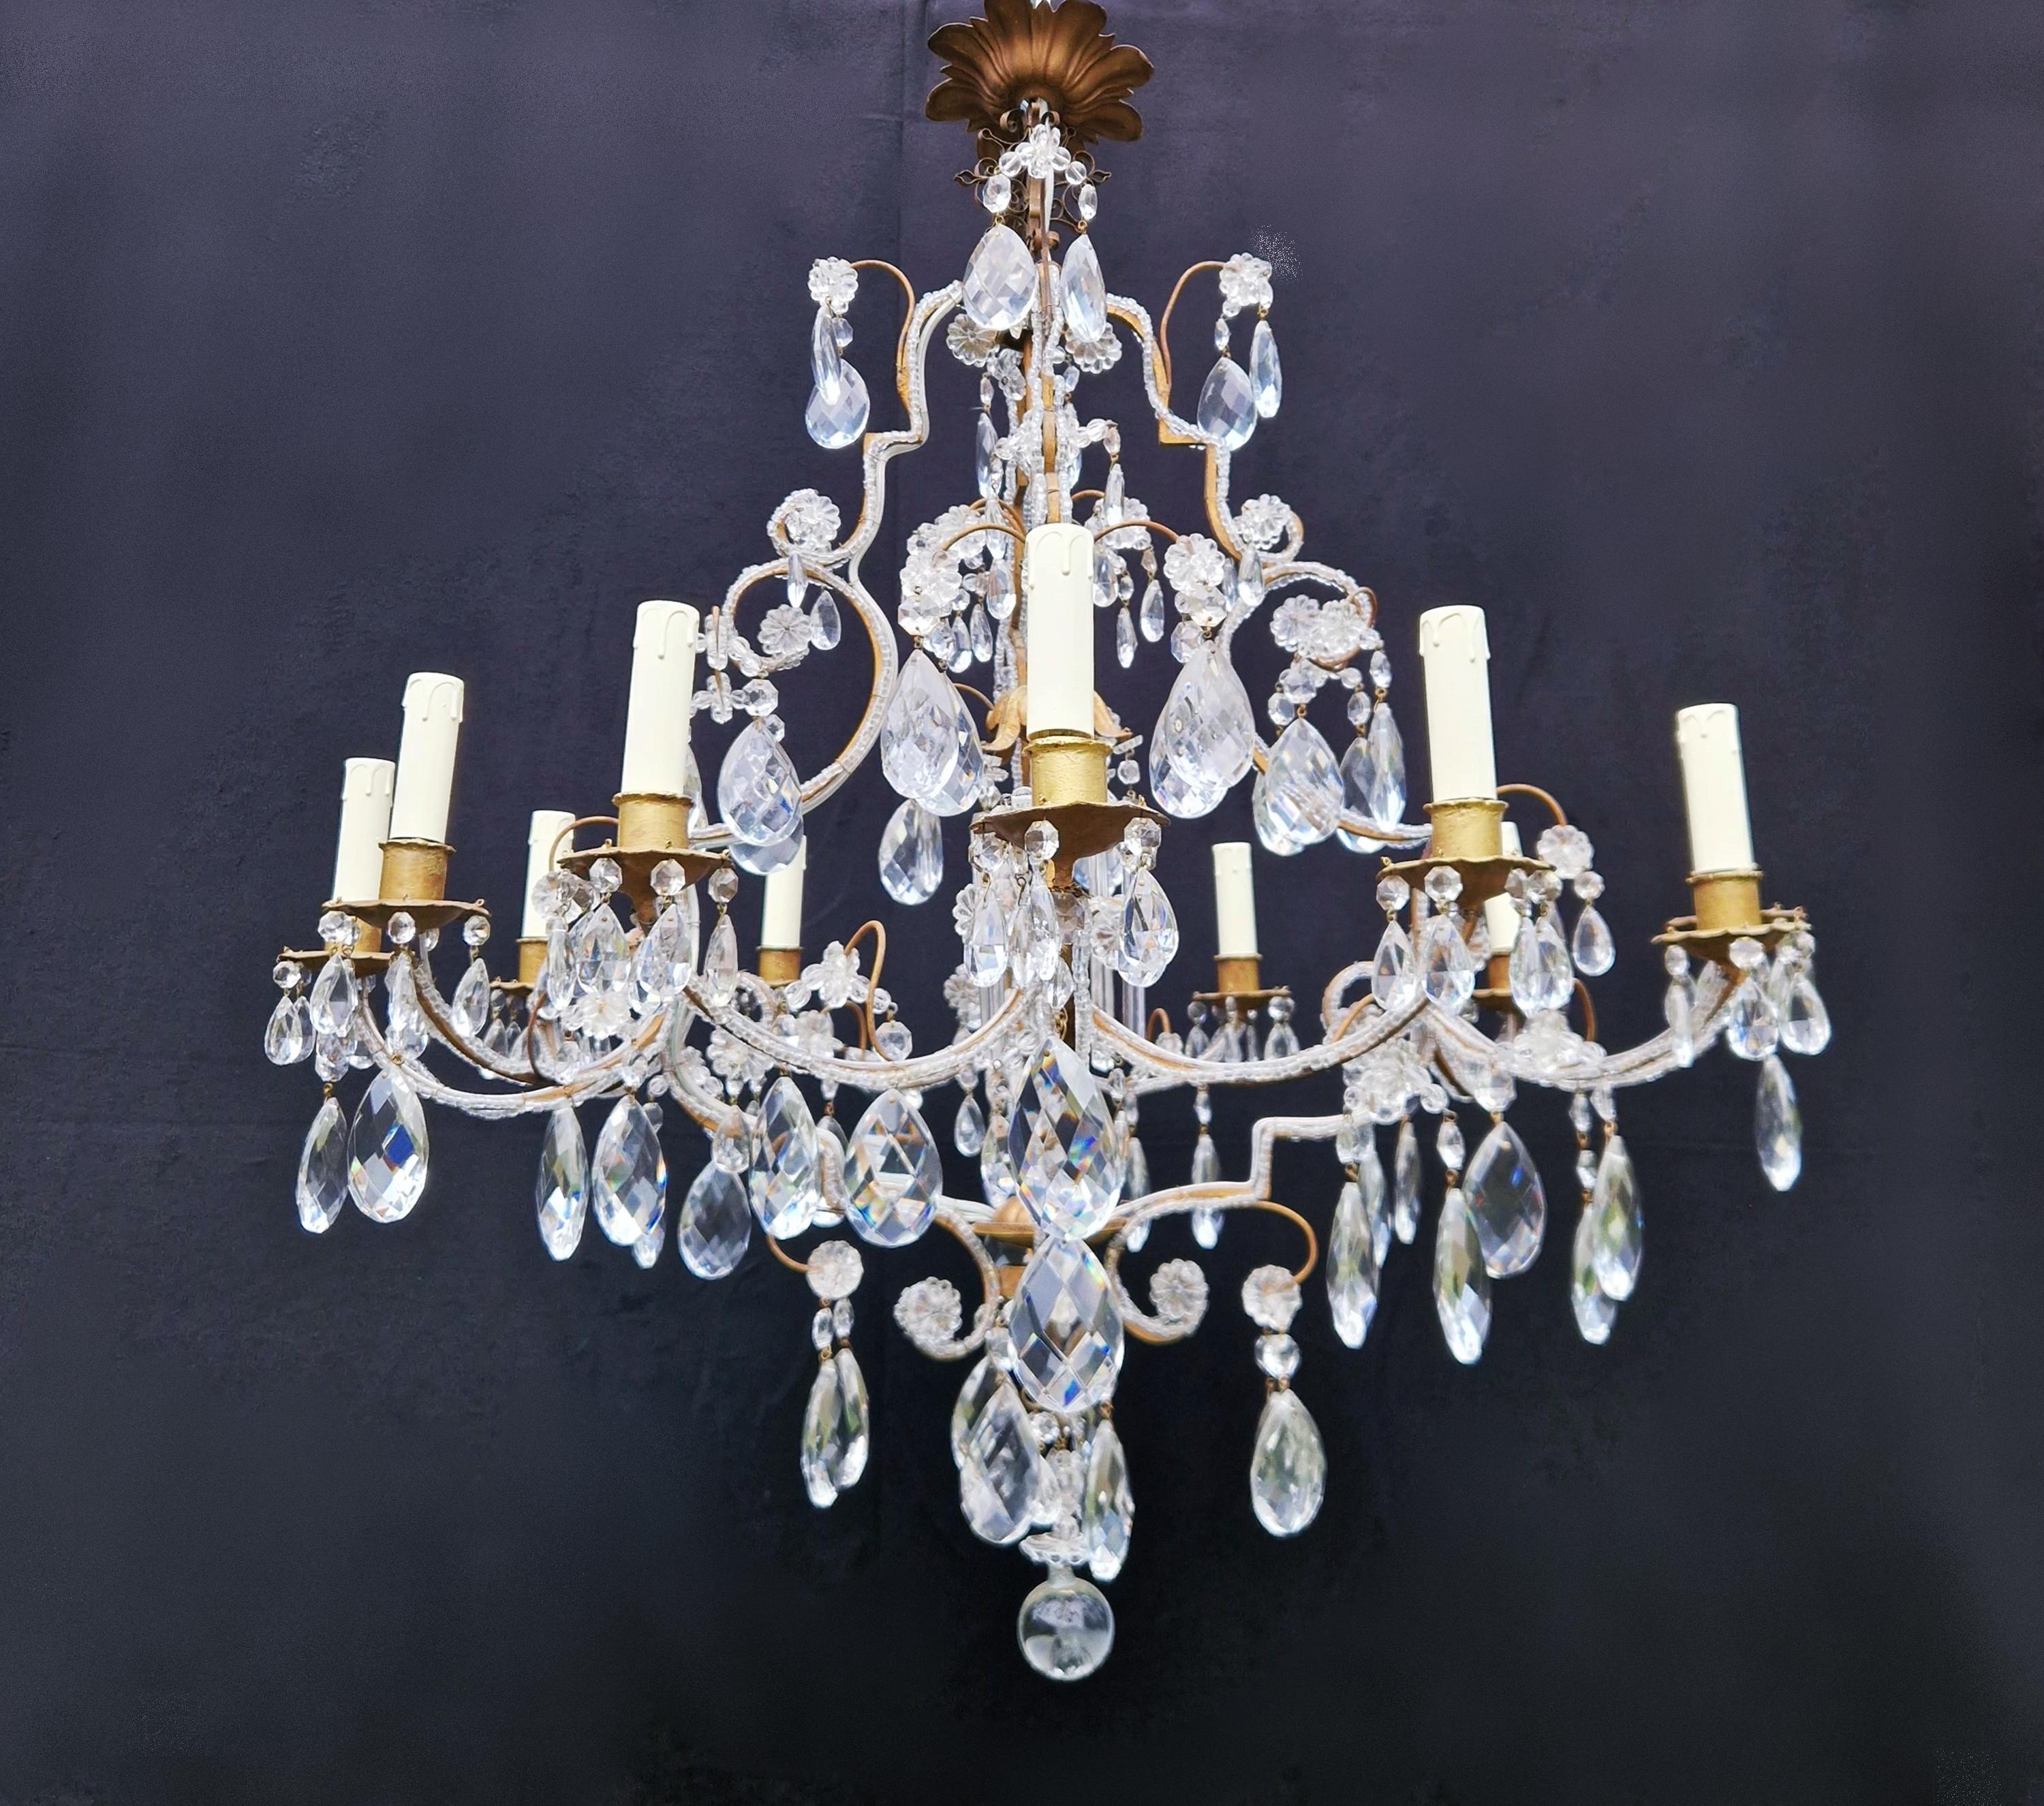 Introducing our treasured old chandelier, lovingly and professionally restored in Berlin. Its electrical wiring is compatible with the US, having been re-wired and prepared for easy hanging. With not a single crystal missing, the cabling has been